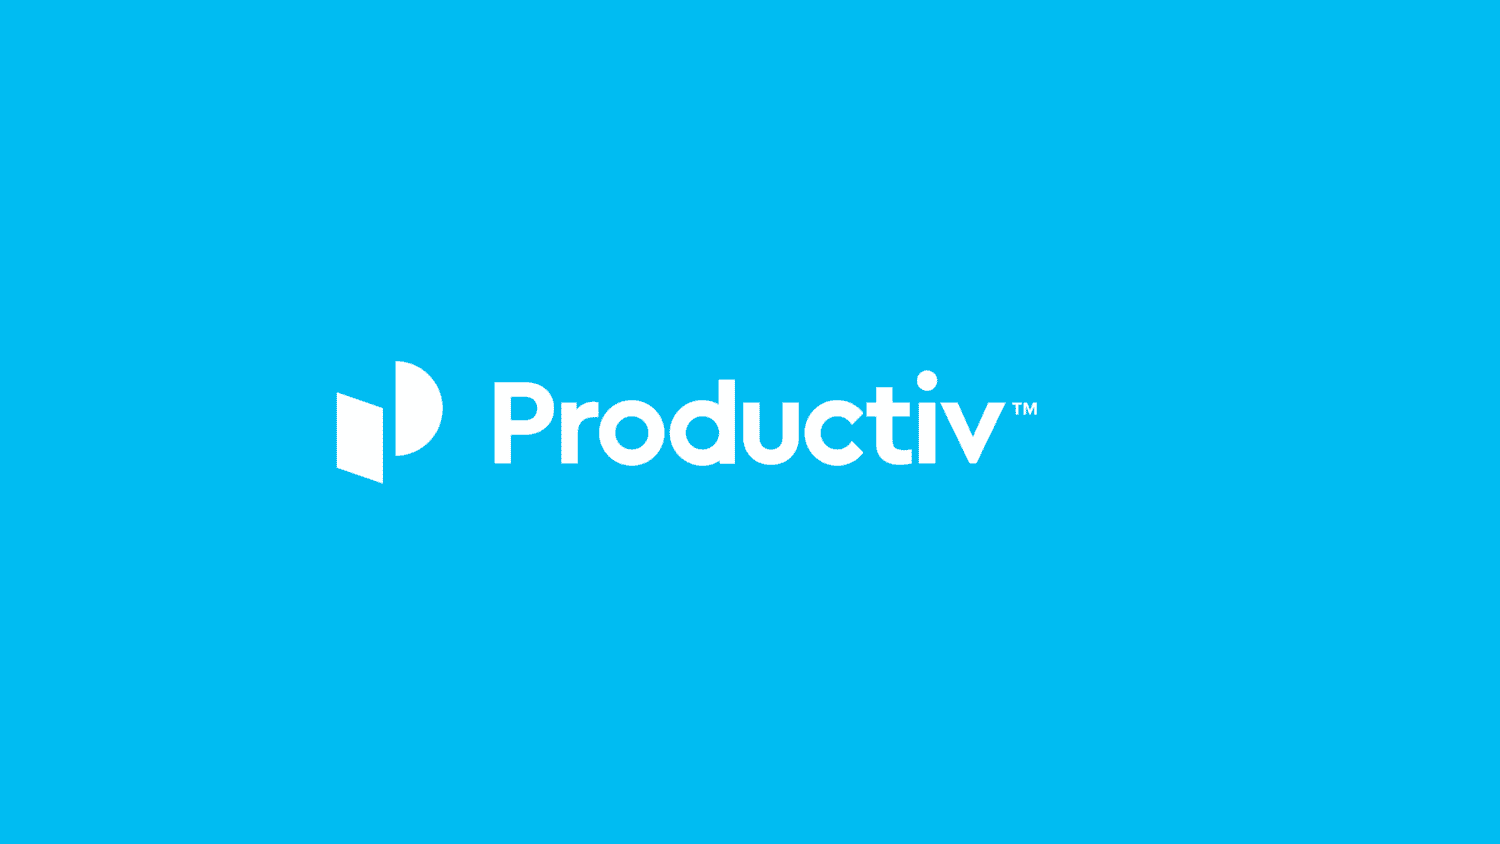 Celebrating our first year being Productiv